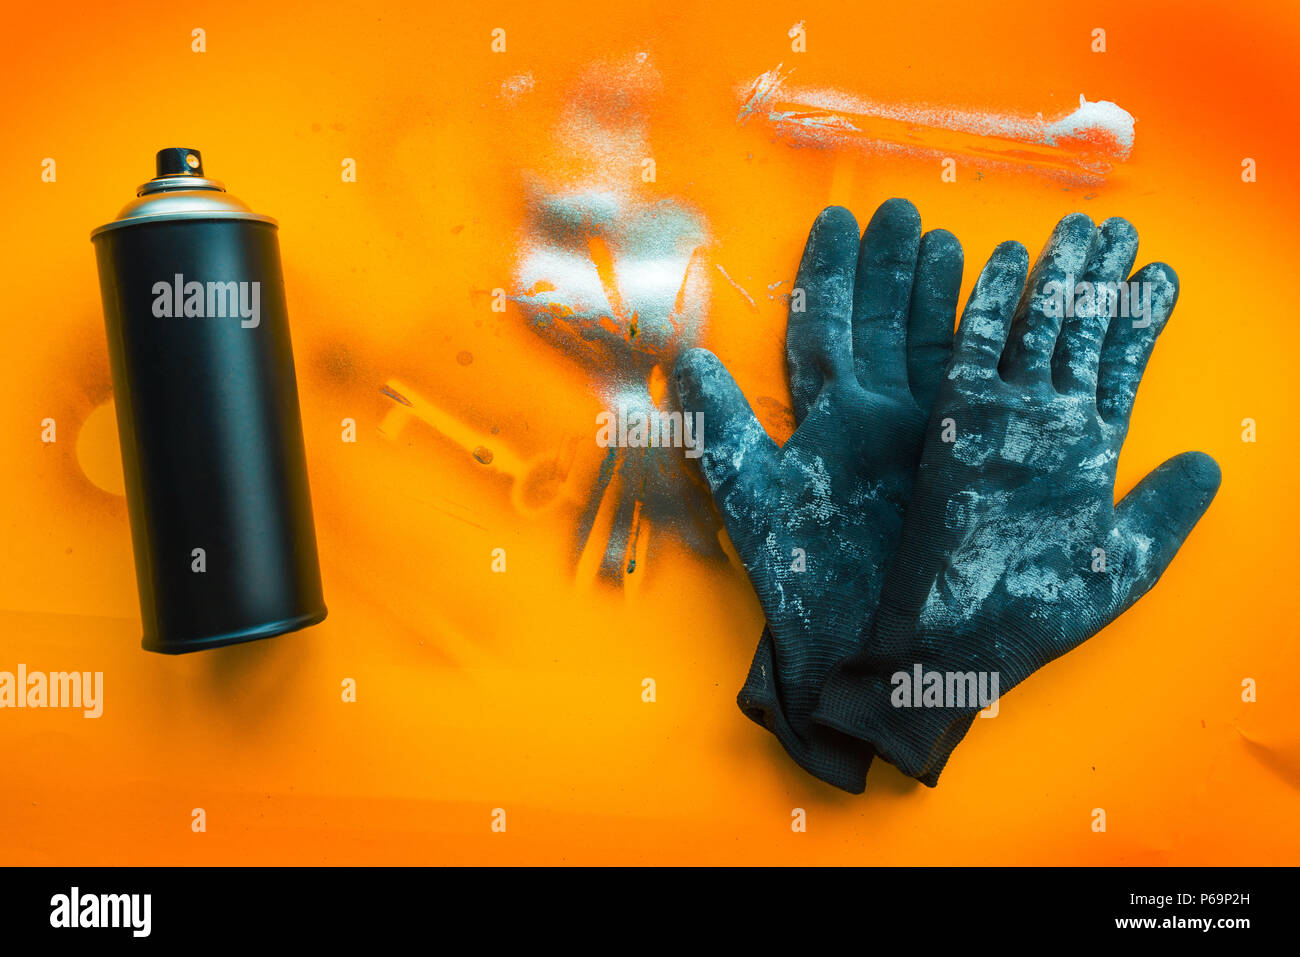 Black color spray can and gloves for graffiti artwork on grunge yellow background Stock Photo